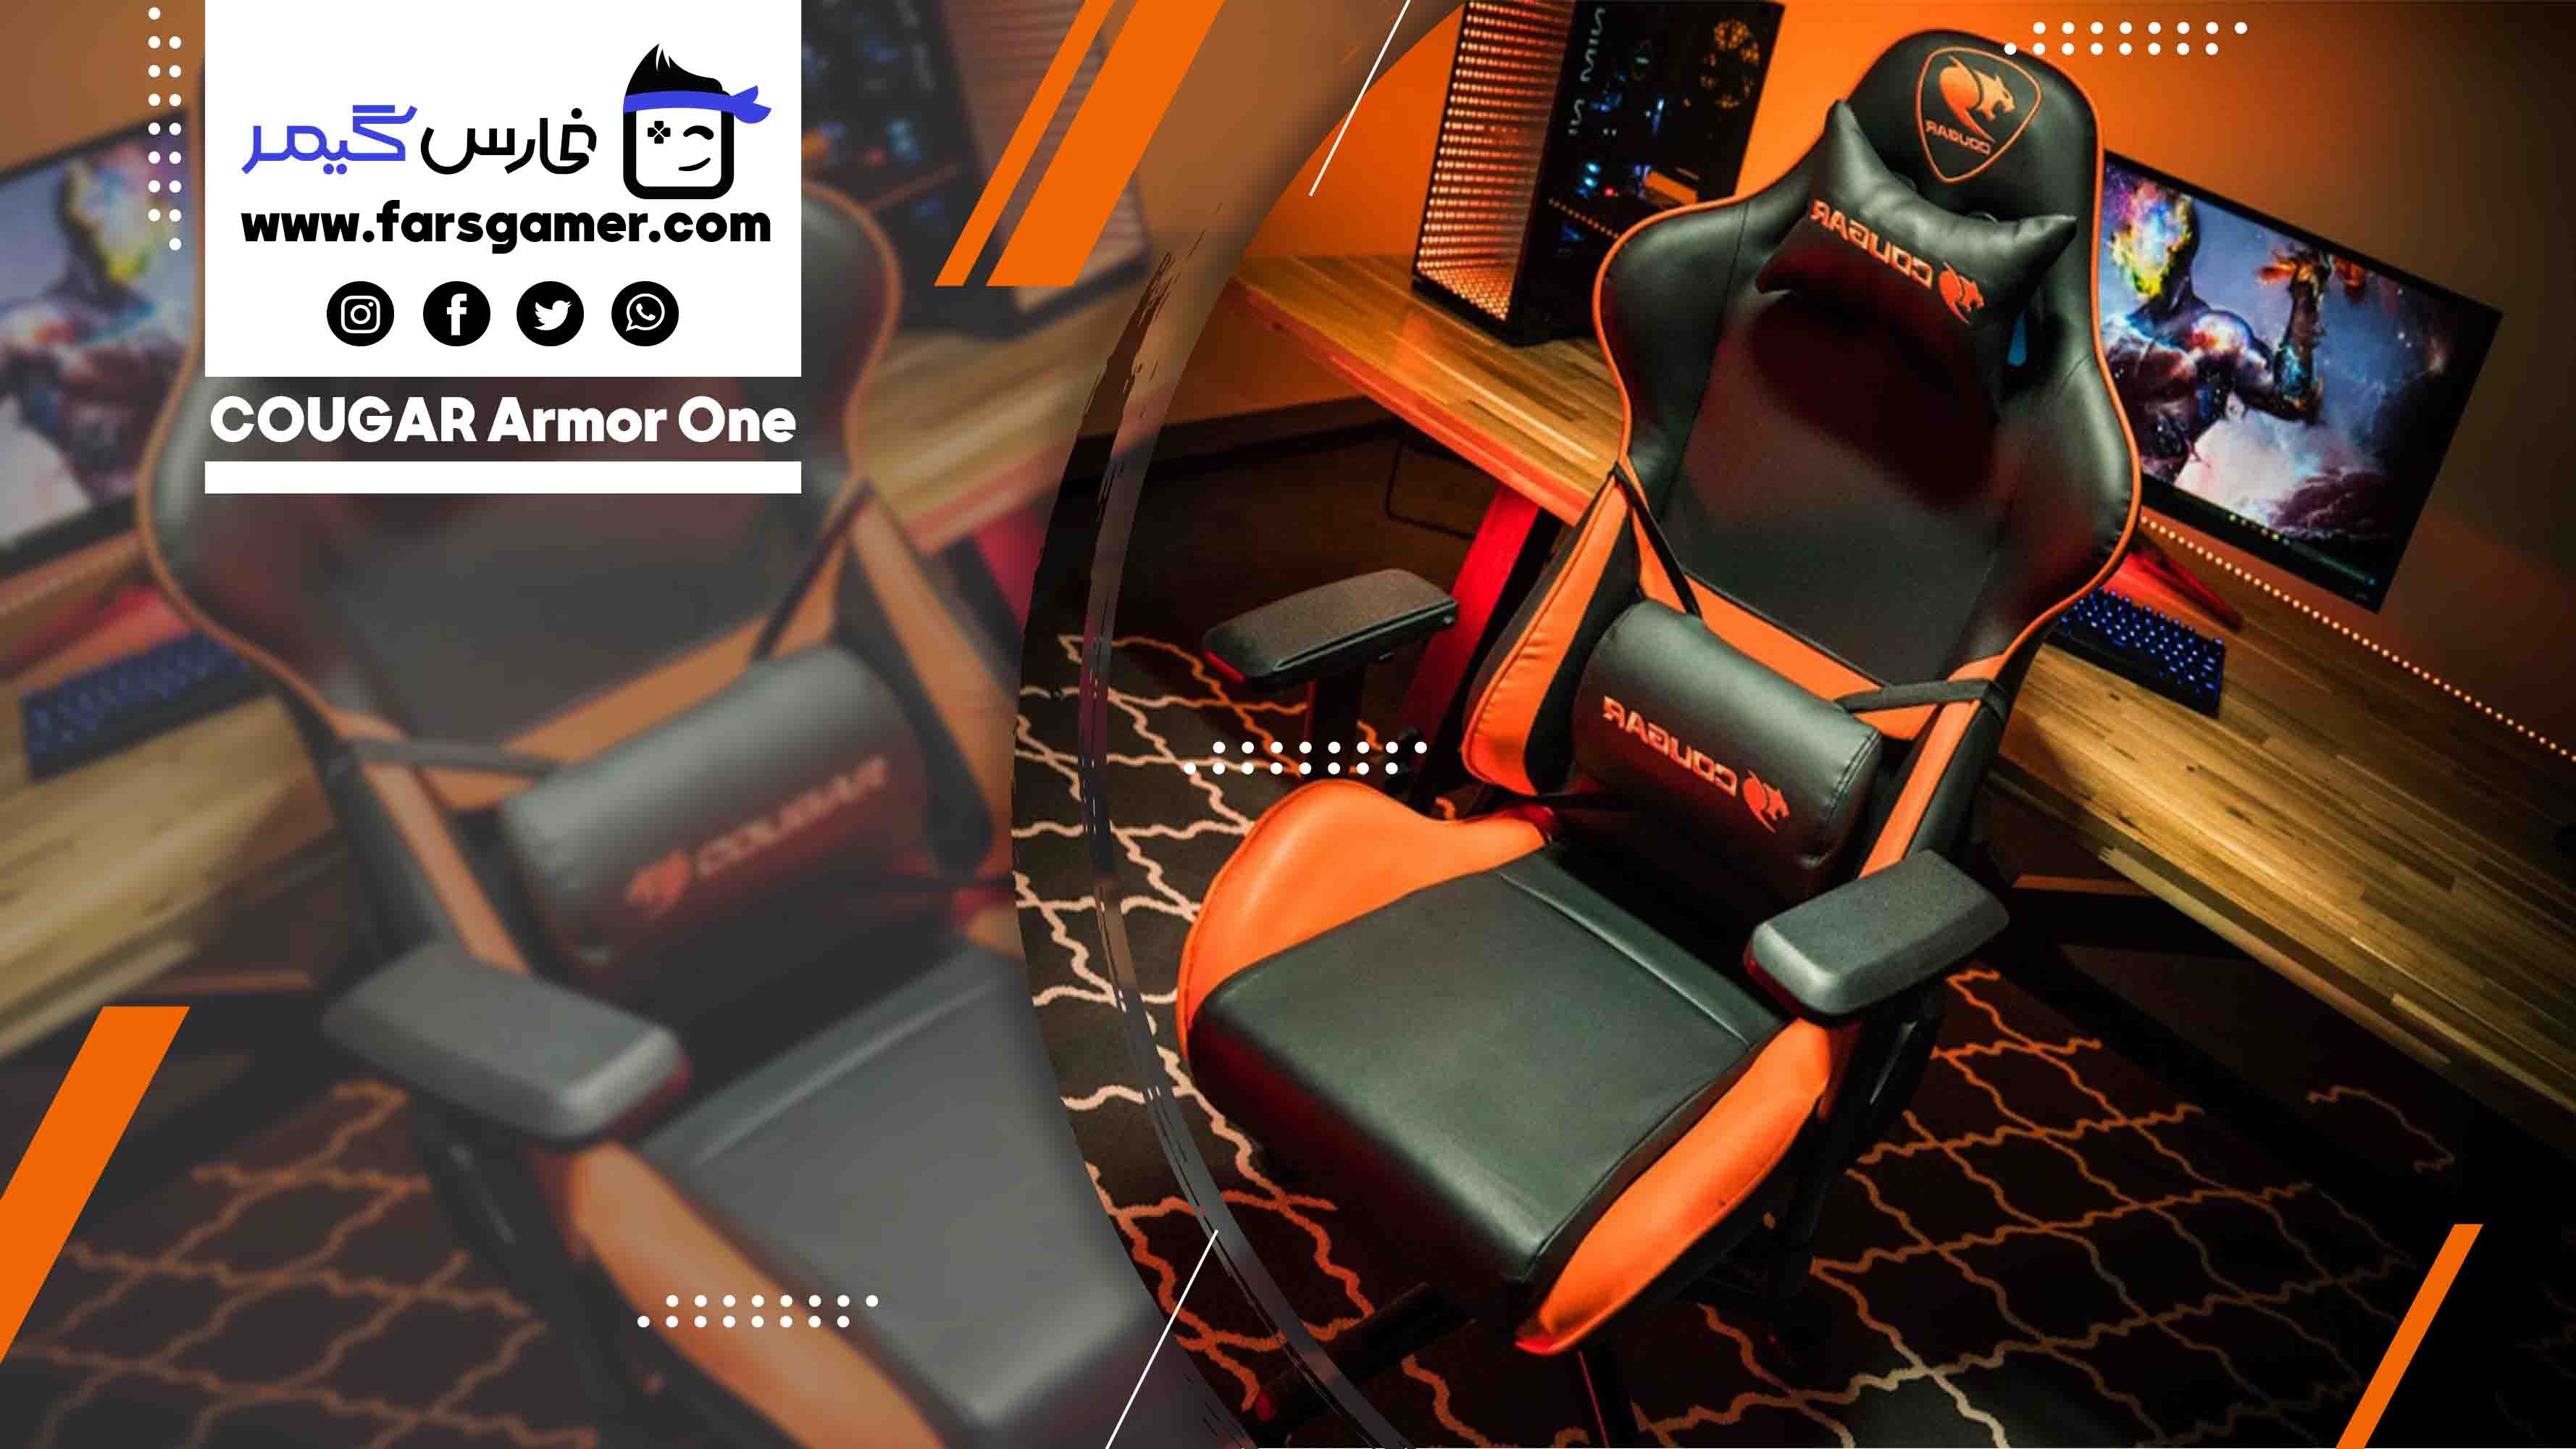 COUGAR Armor One Gaming Chair